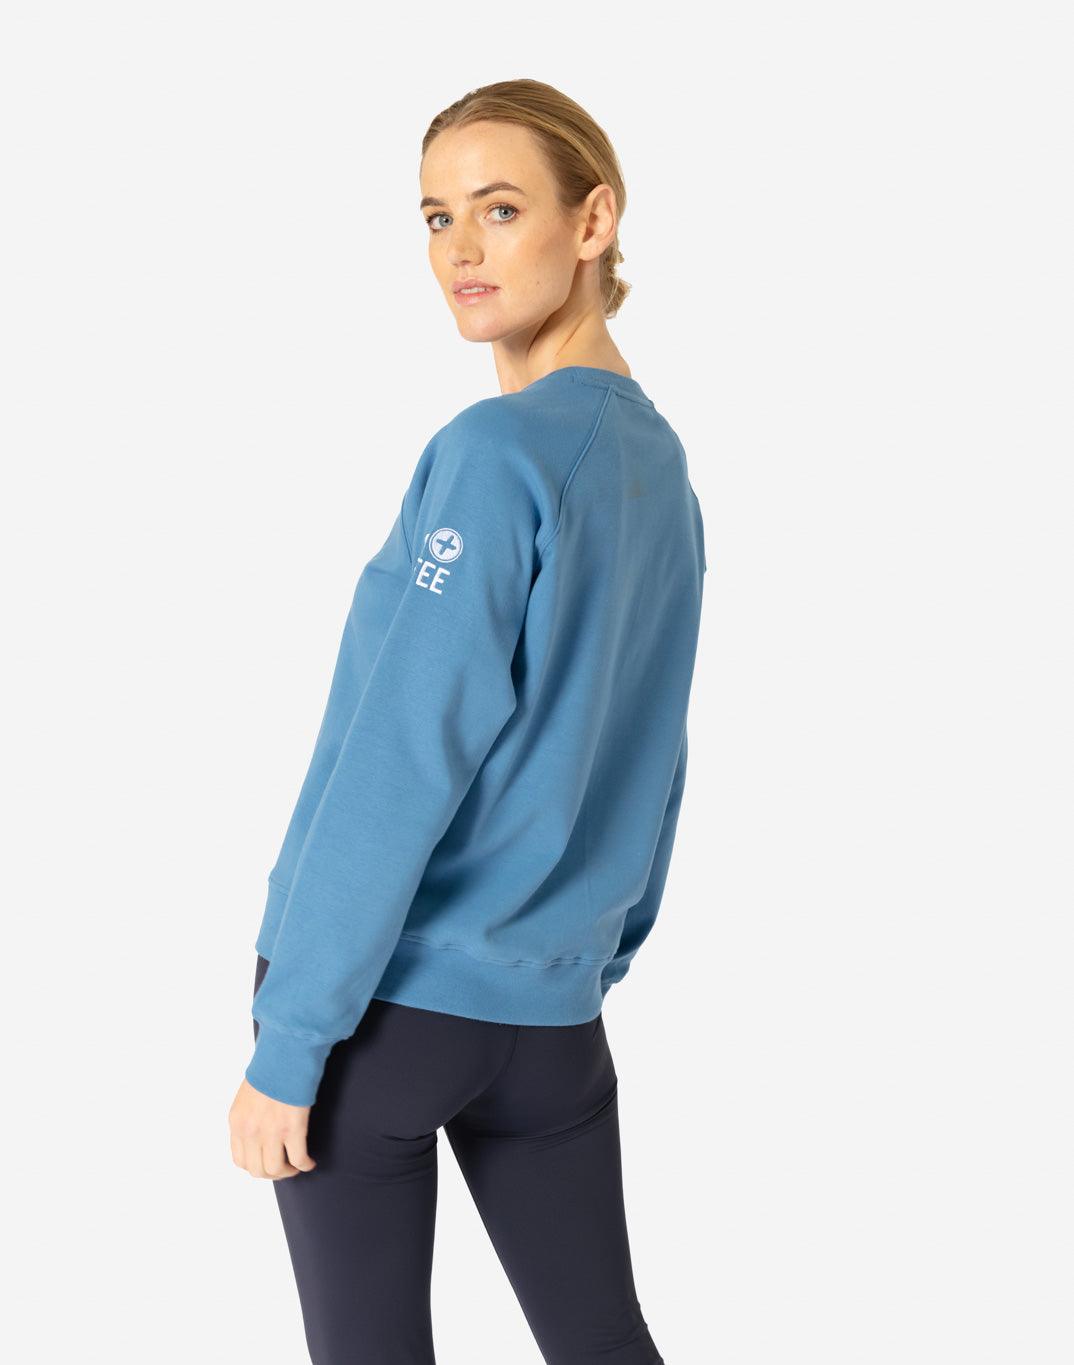 Chill Base Crew in Astral Blue - Sweatshirts - Gym+Coffee IE